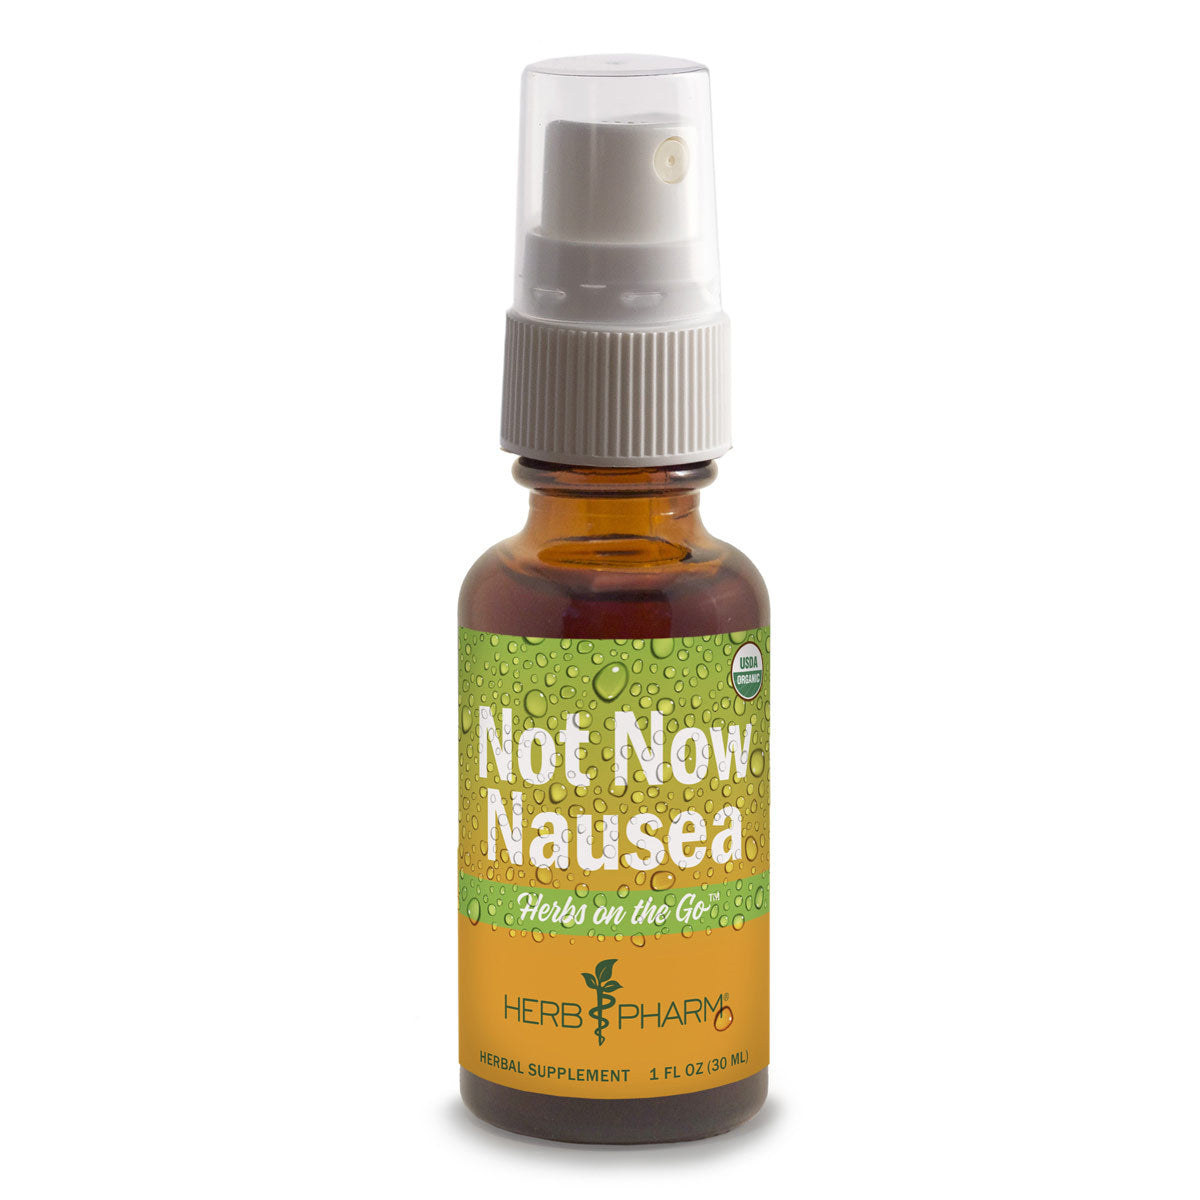 Primary image of Herbs on the Go: Not Now Nausea